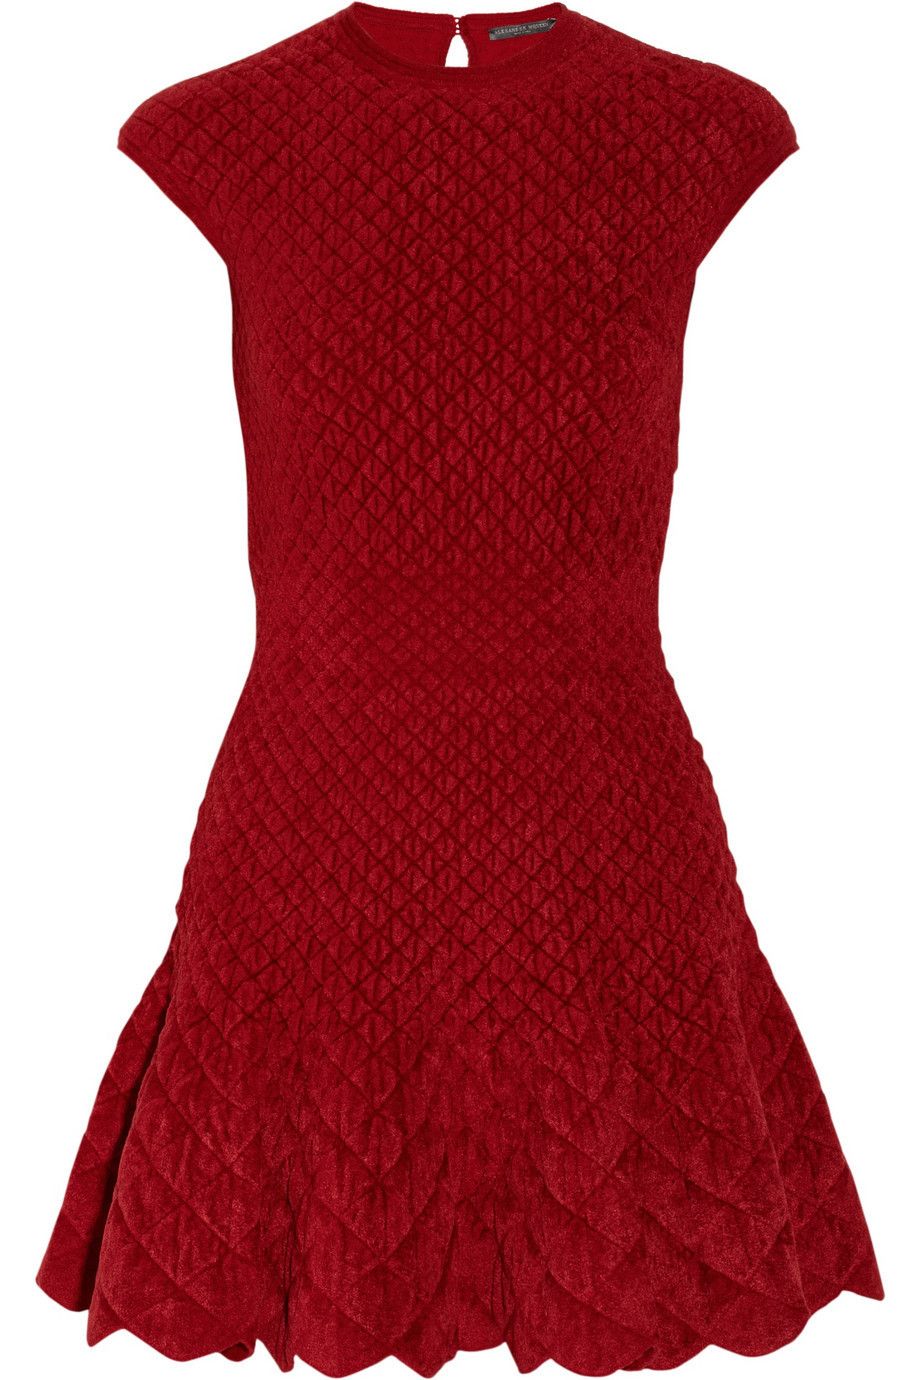 Dress, Product, Sleeve, Red, Textile, Pattern, One-piece garment, Maroon, Magenta, Carmine, 